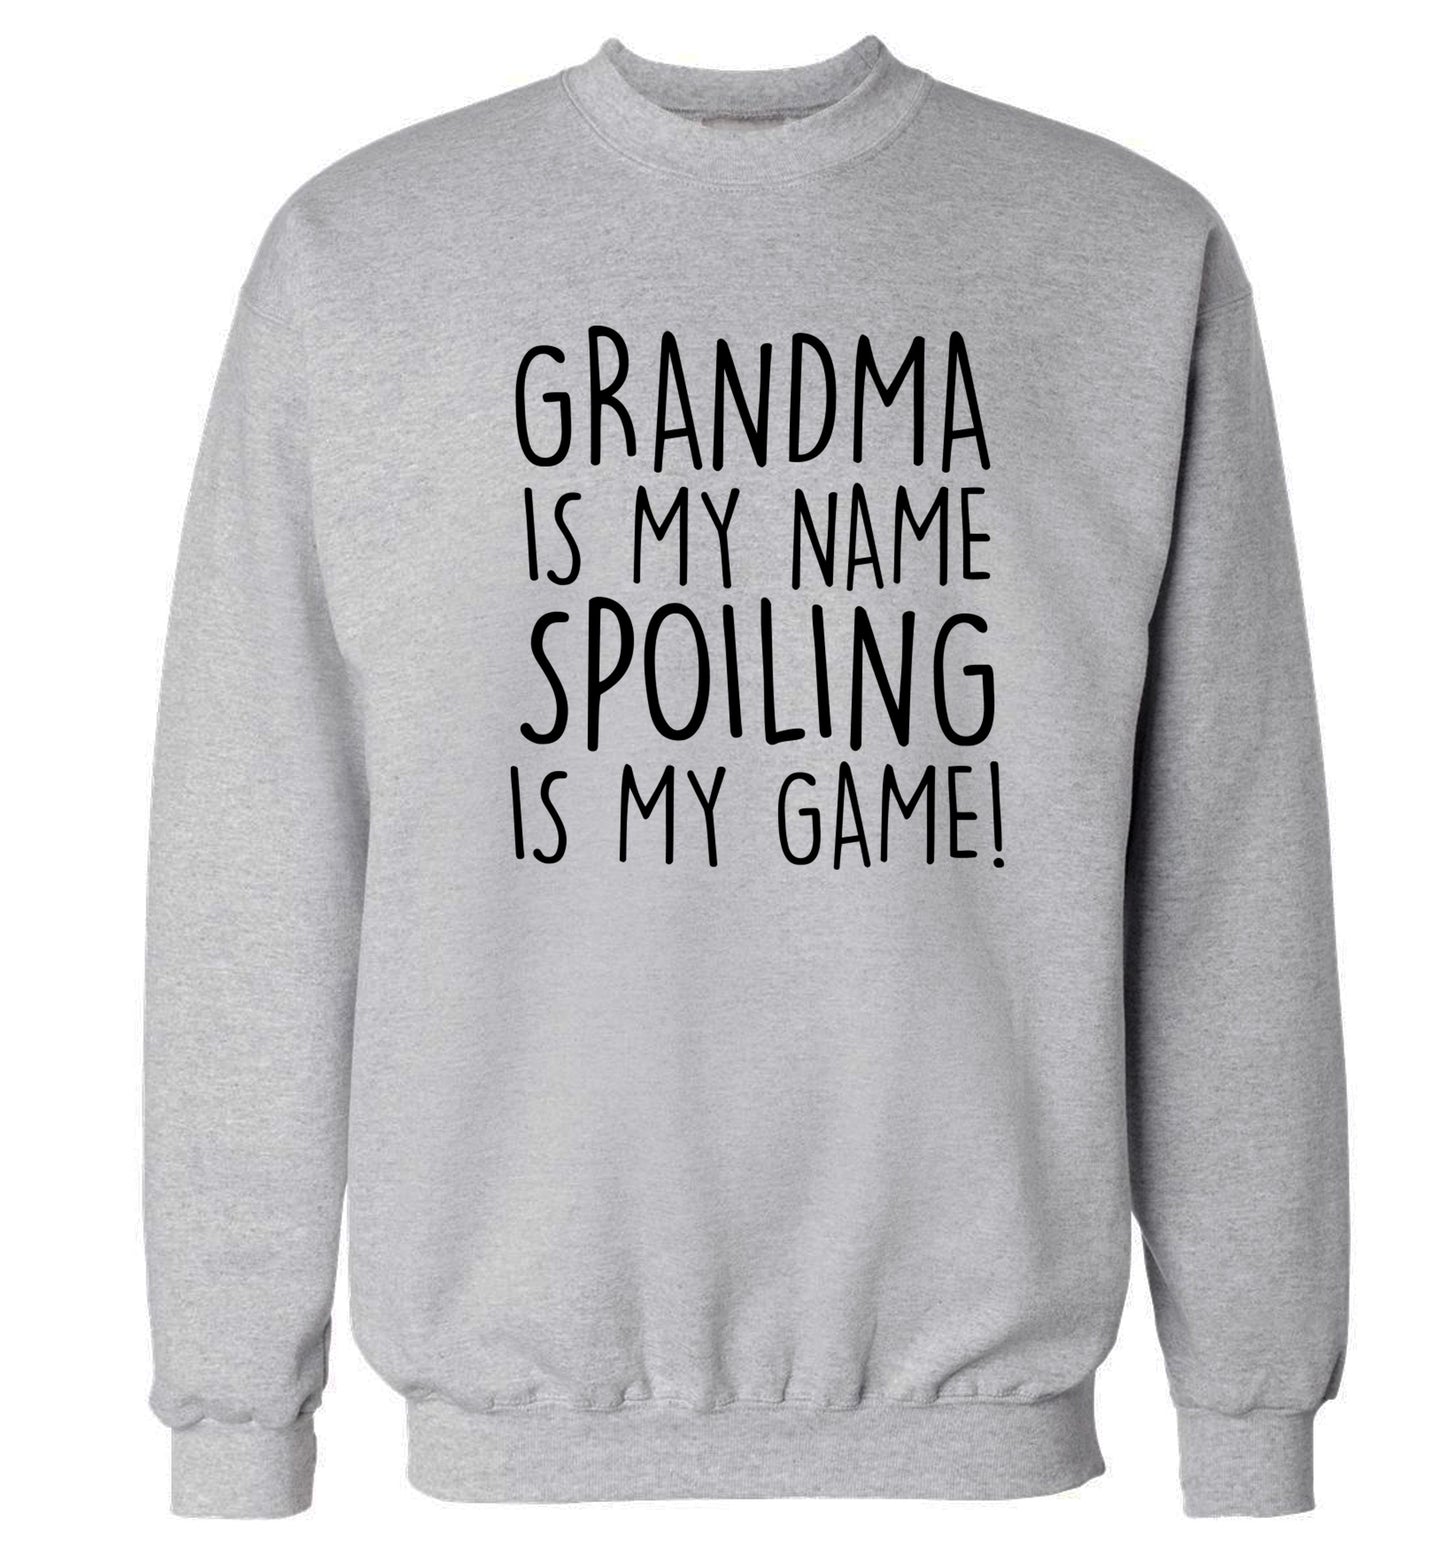 Grandma is my name, spoiling is my game Adult's unisex grey Sweater 2XL